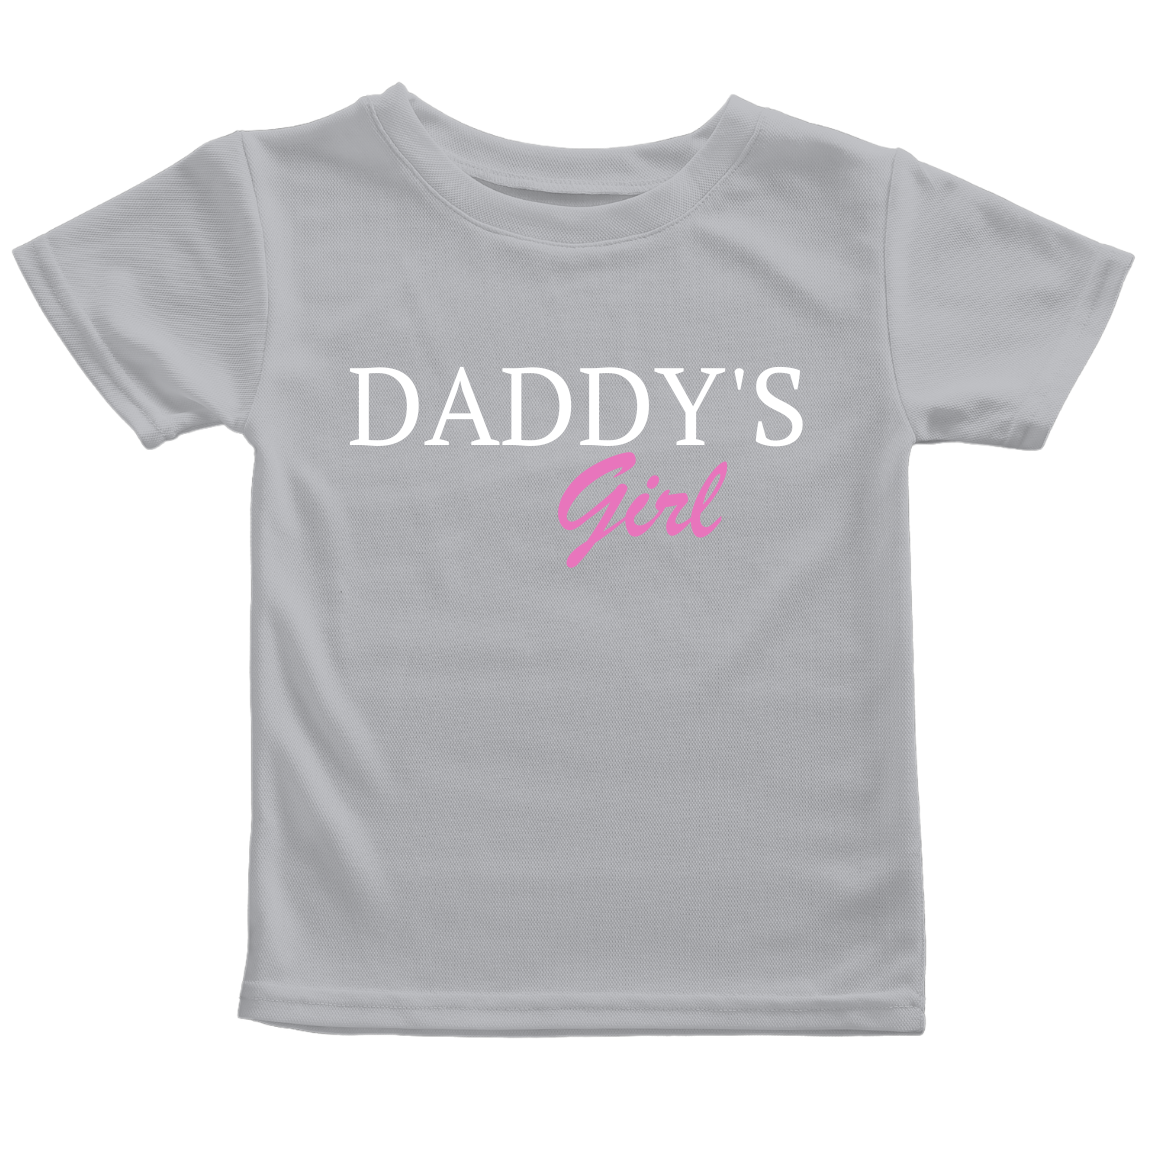 Youth - "Daddy's Girl" Matching Shirt For Daughter